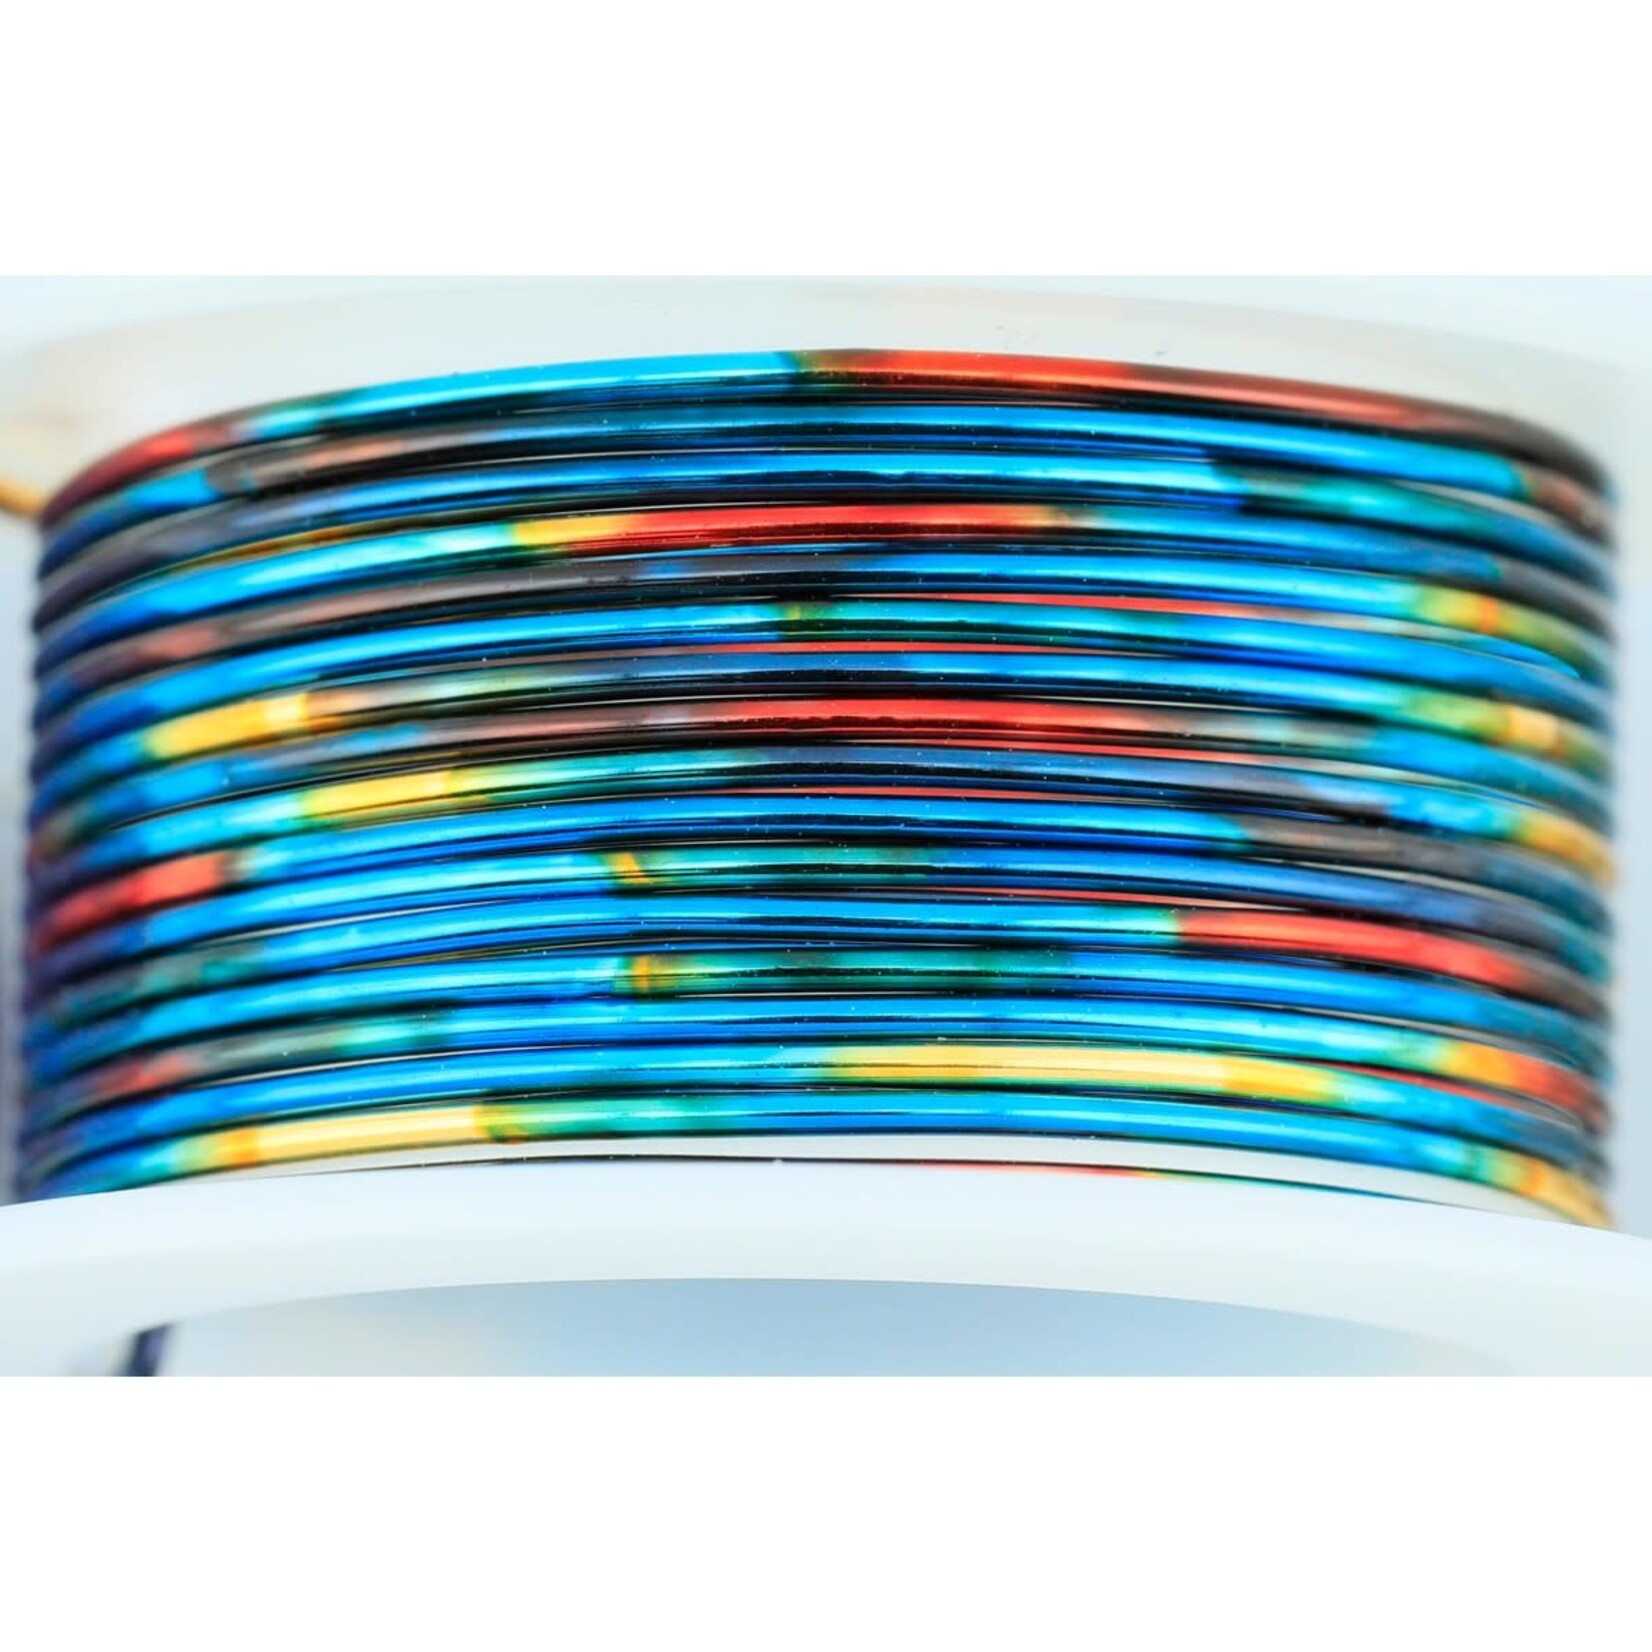 Artistic Wire Artistic Wire Multi-Colored Blue-Red-Gold Craft Wire 22 Gauge, 6 Yard Spool